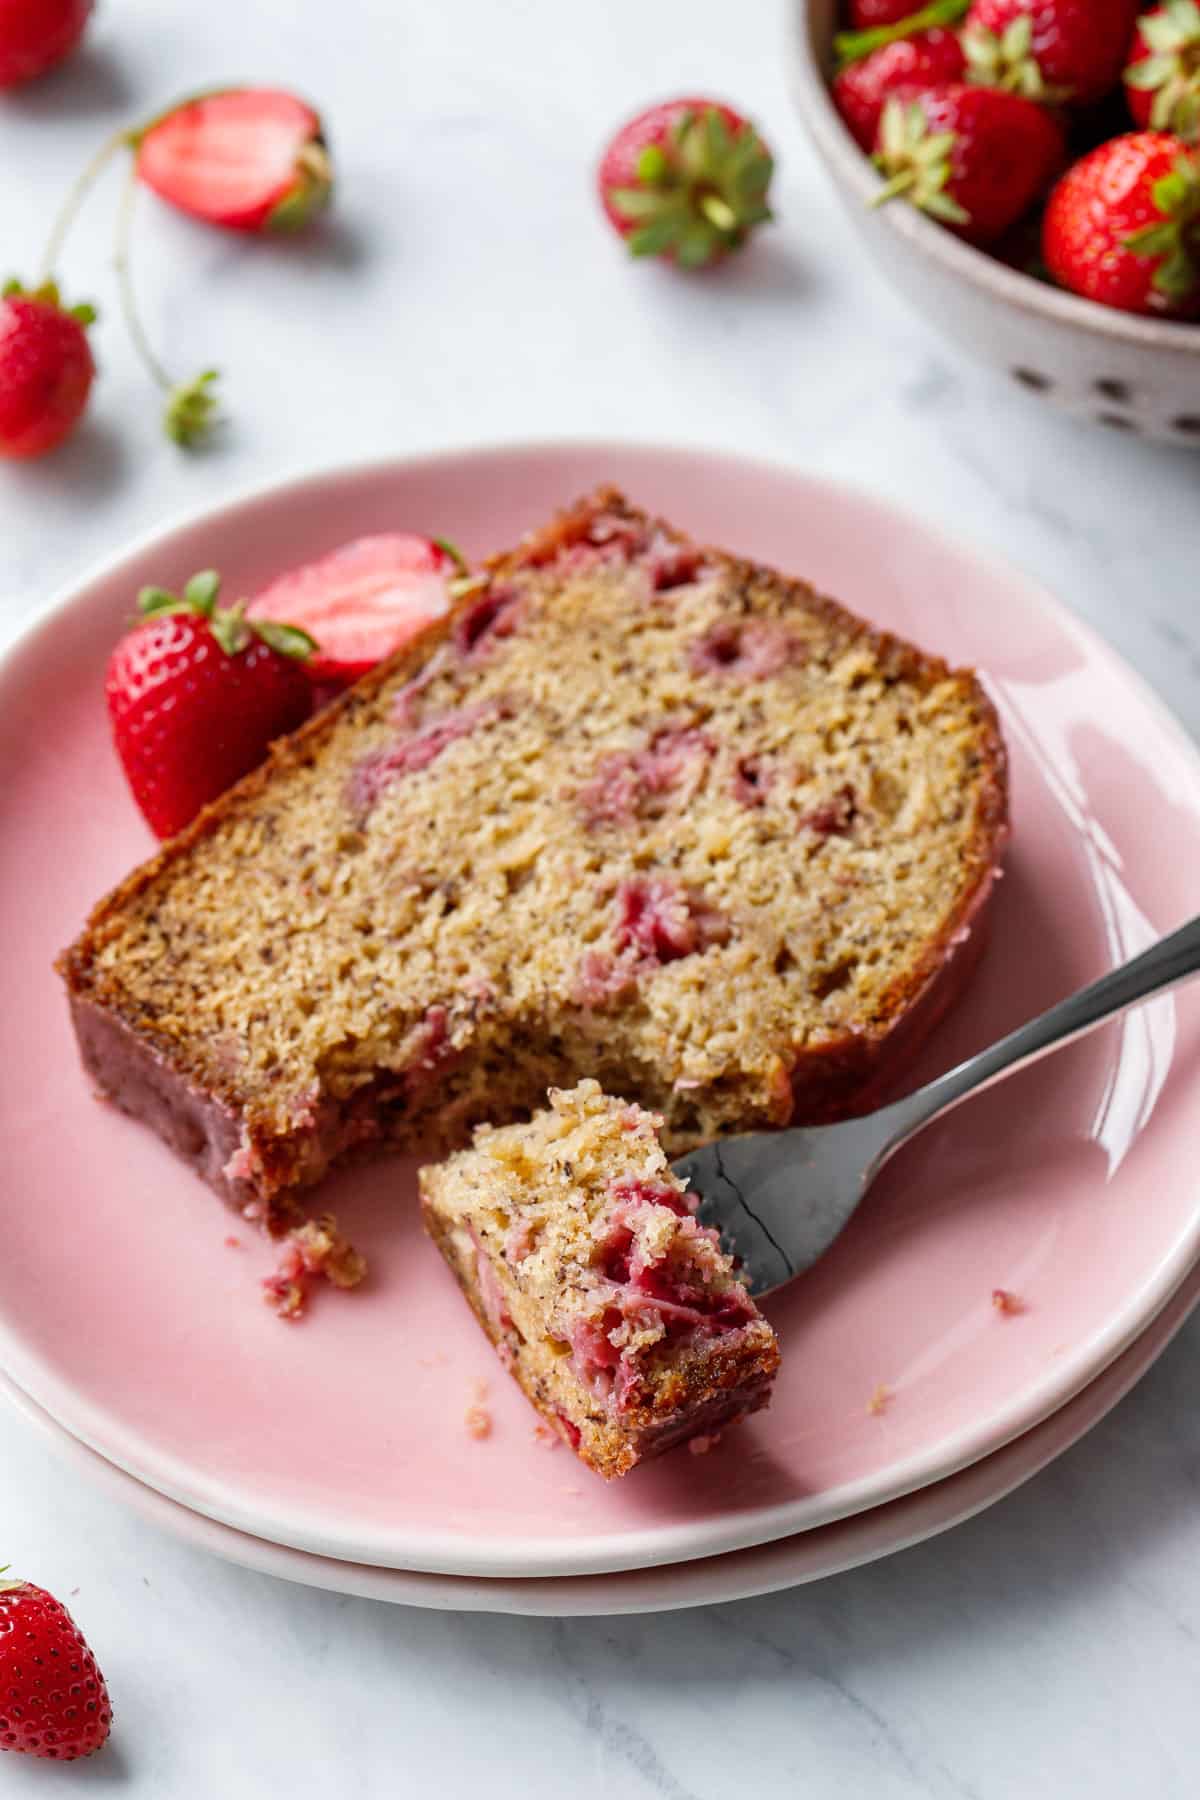 Slice of Strawberry Banana Bread on a pink plate, forkful cut out to show the moist texture.